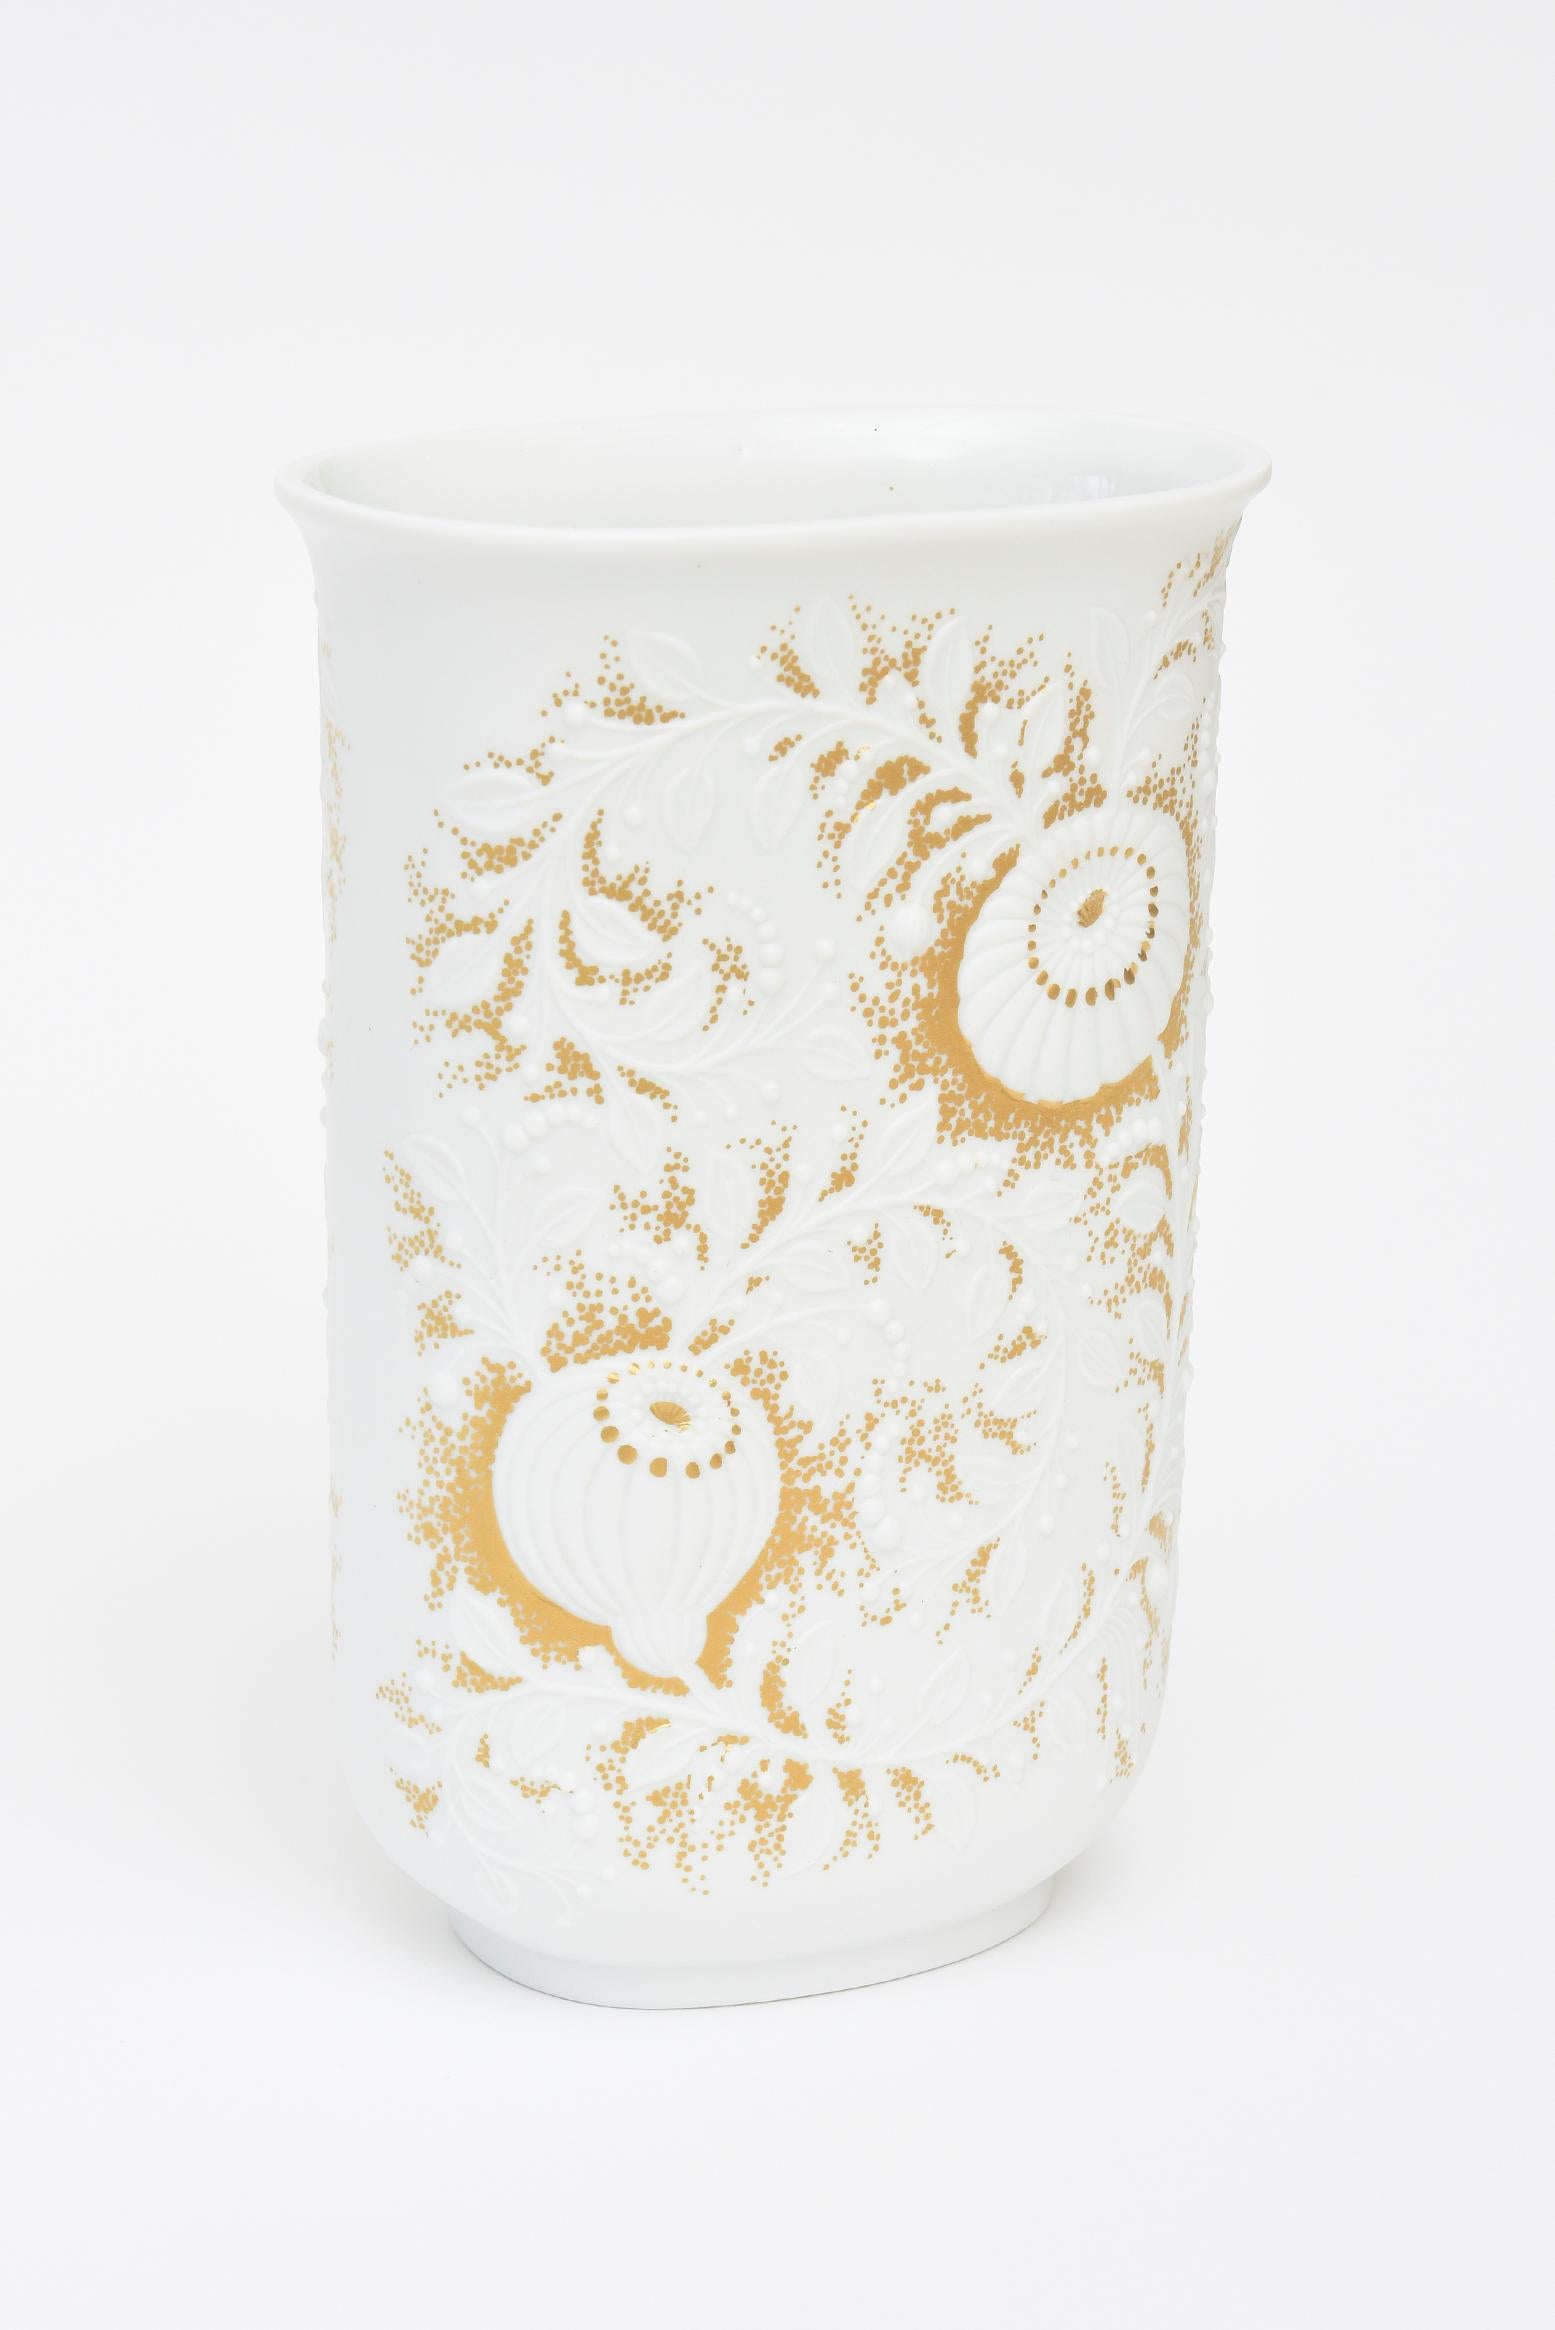 Allemand Kaiser Signed White and Gold Porcelain Vase With Textural Applied Flowers 60's en vente